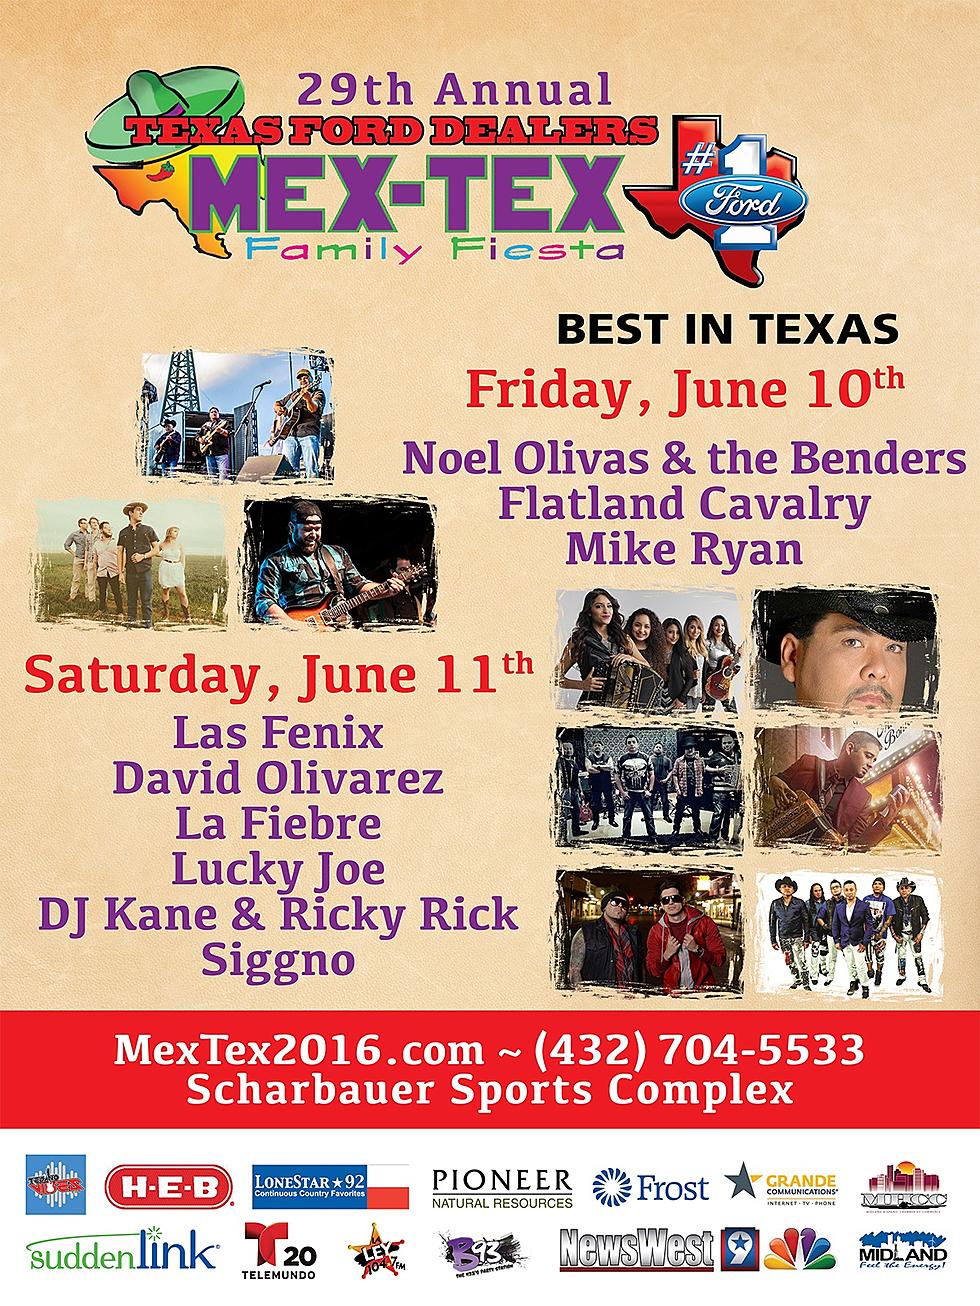 A Pair of Mex-Tex Tickets for Friday June 10th